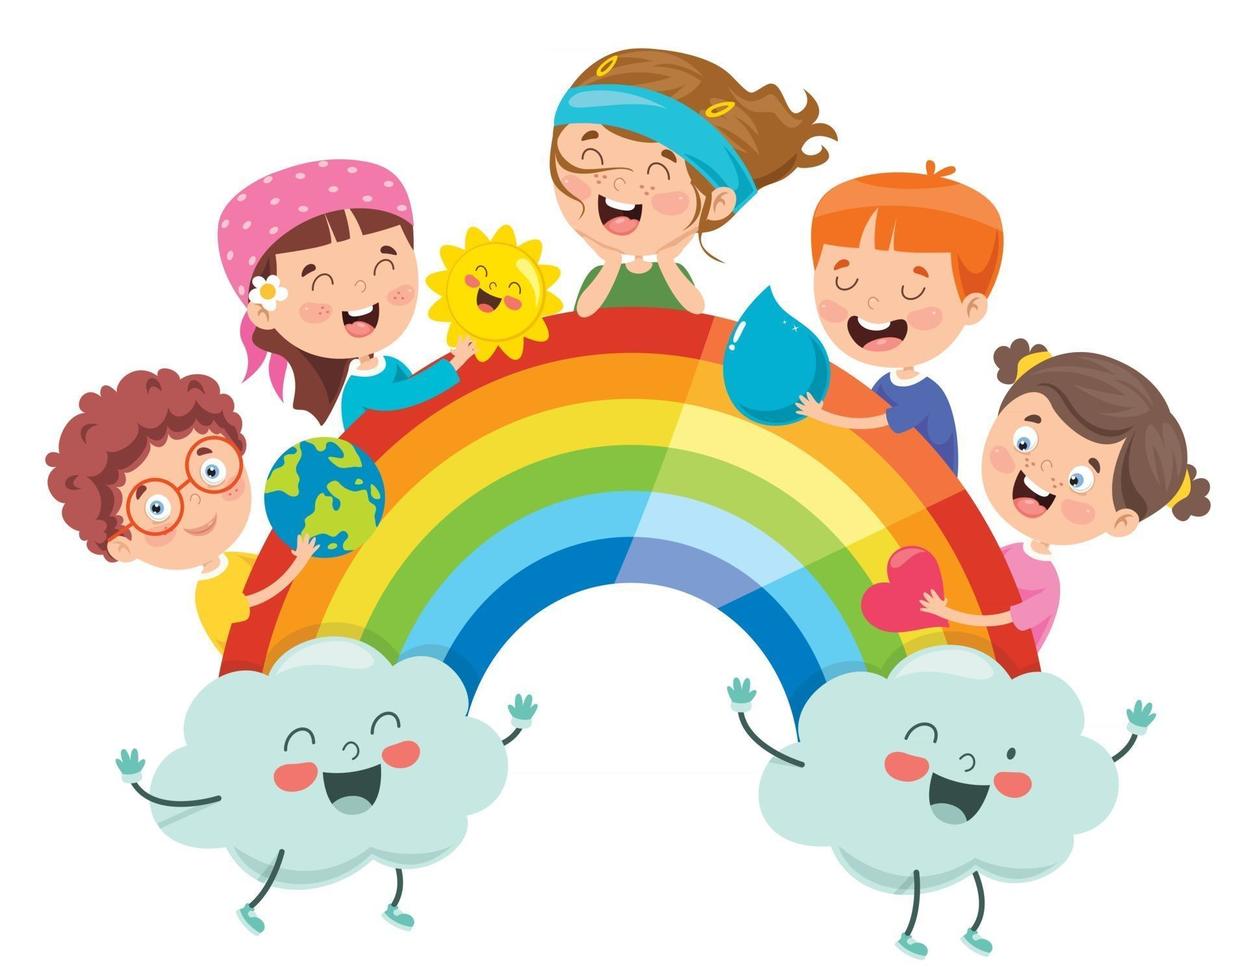 Concept Design With Funny Children vector